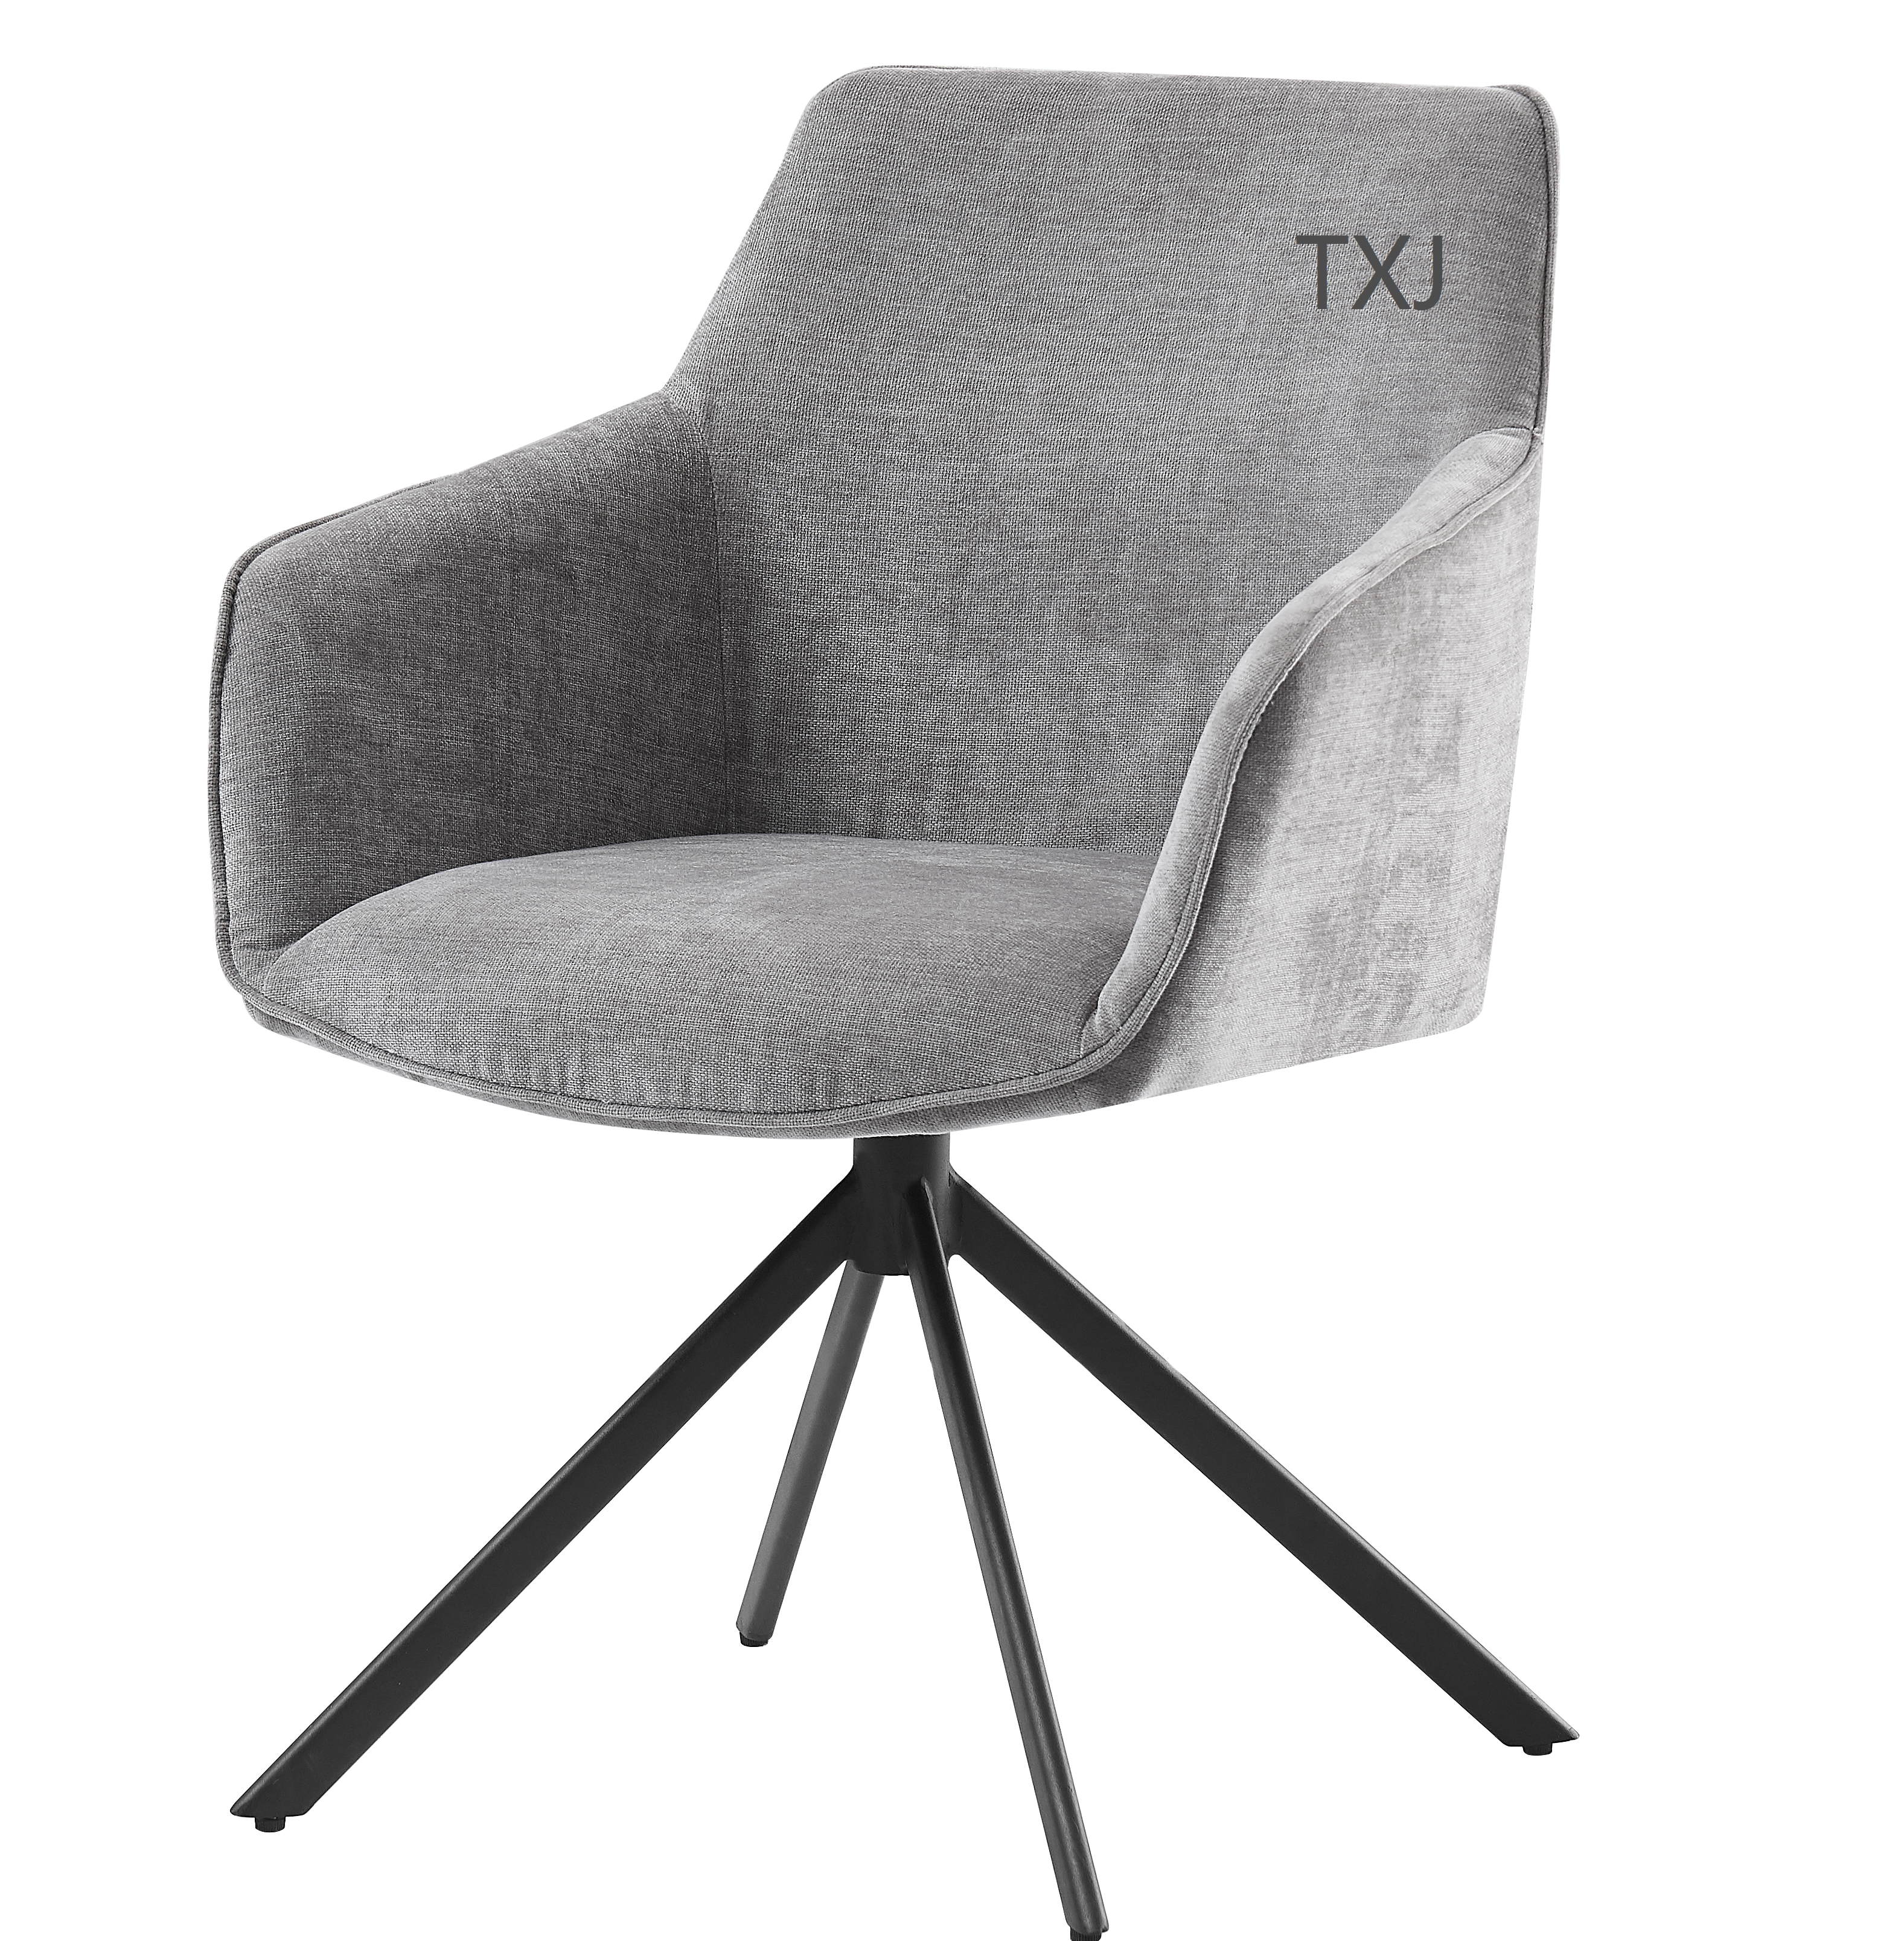 TXJ TC-2134 Audrey Arm chair Made of fabric with Square mental tubes in black powder coating Featured Image